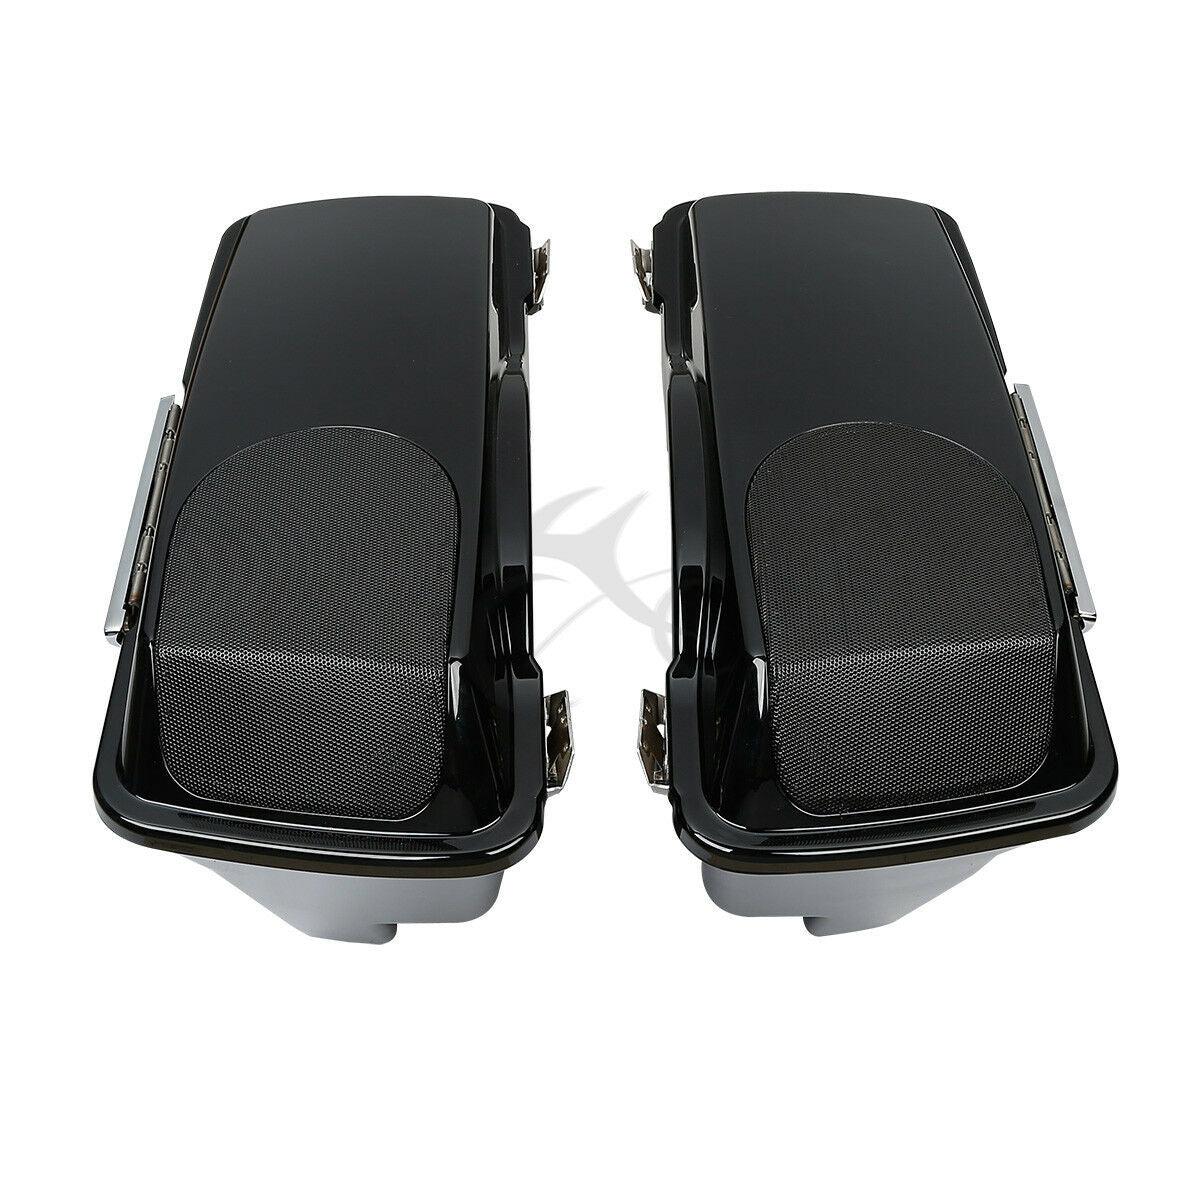 5" Stretched Saddlebag W/ Speaker Lids Fit For Harley Touring Road Glide 1993-13 - Moto Life Products